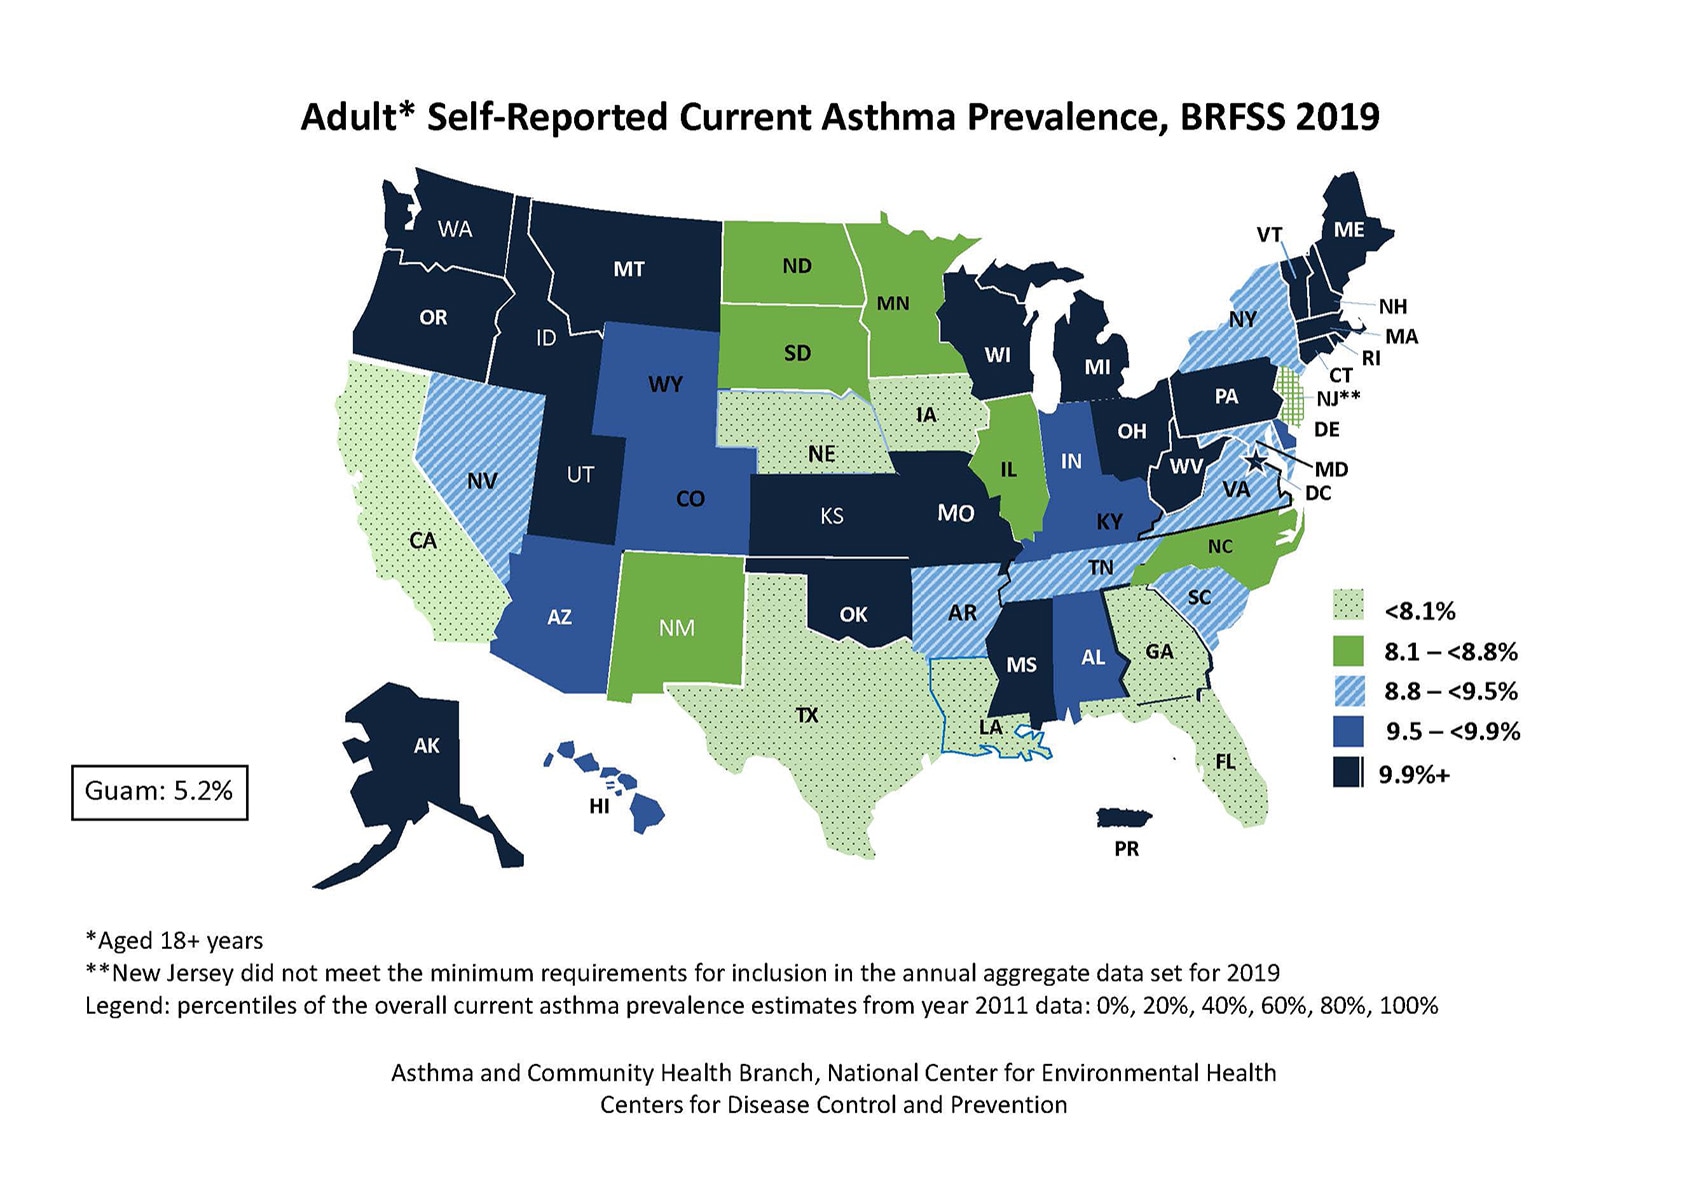 U.S. map showing adult self-reported current asthma prevalence by state for BRFSS 2019